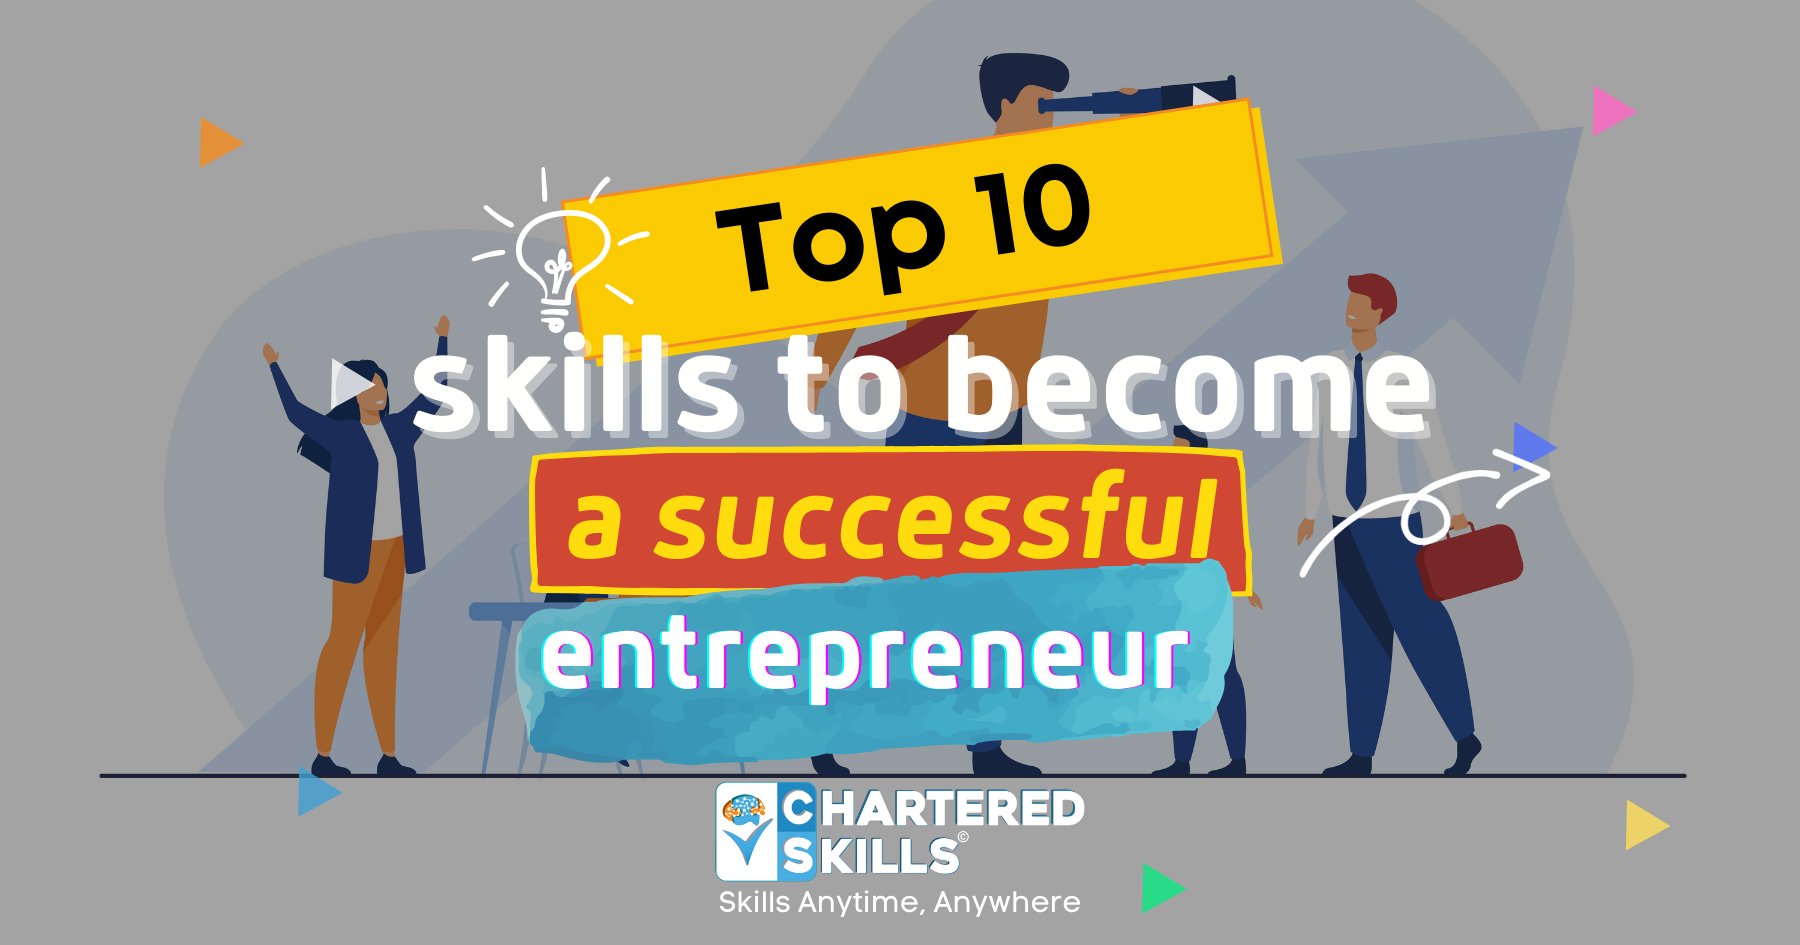 10 skills to become a successful entrepreneur